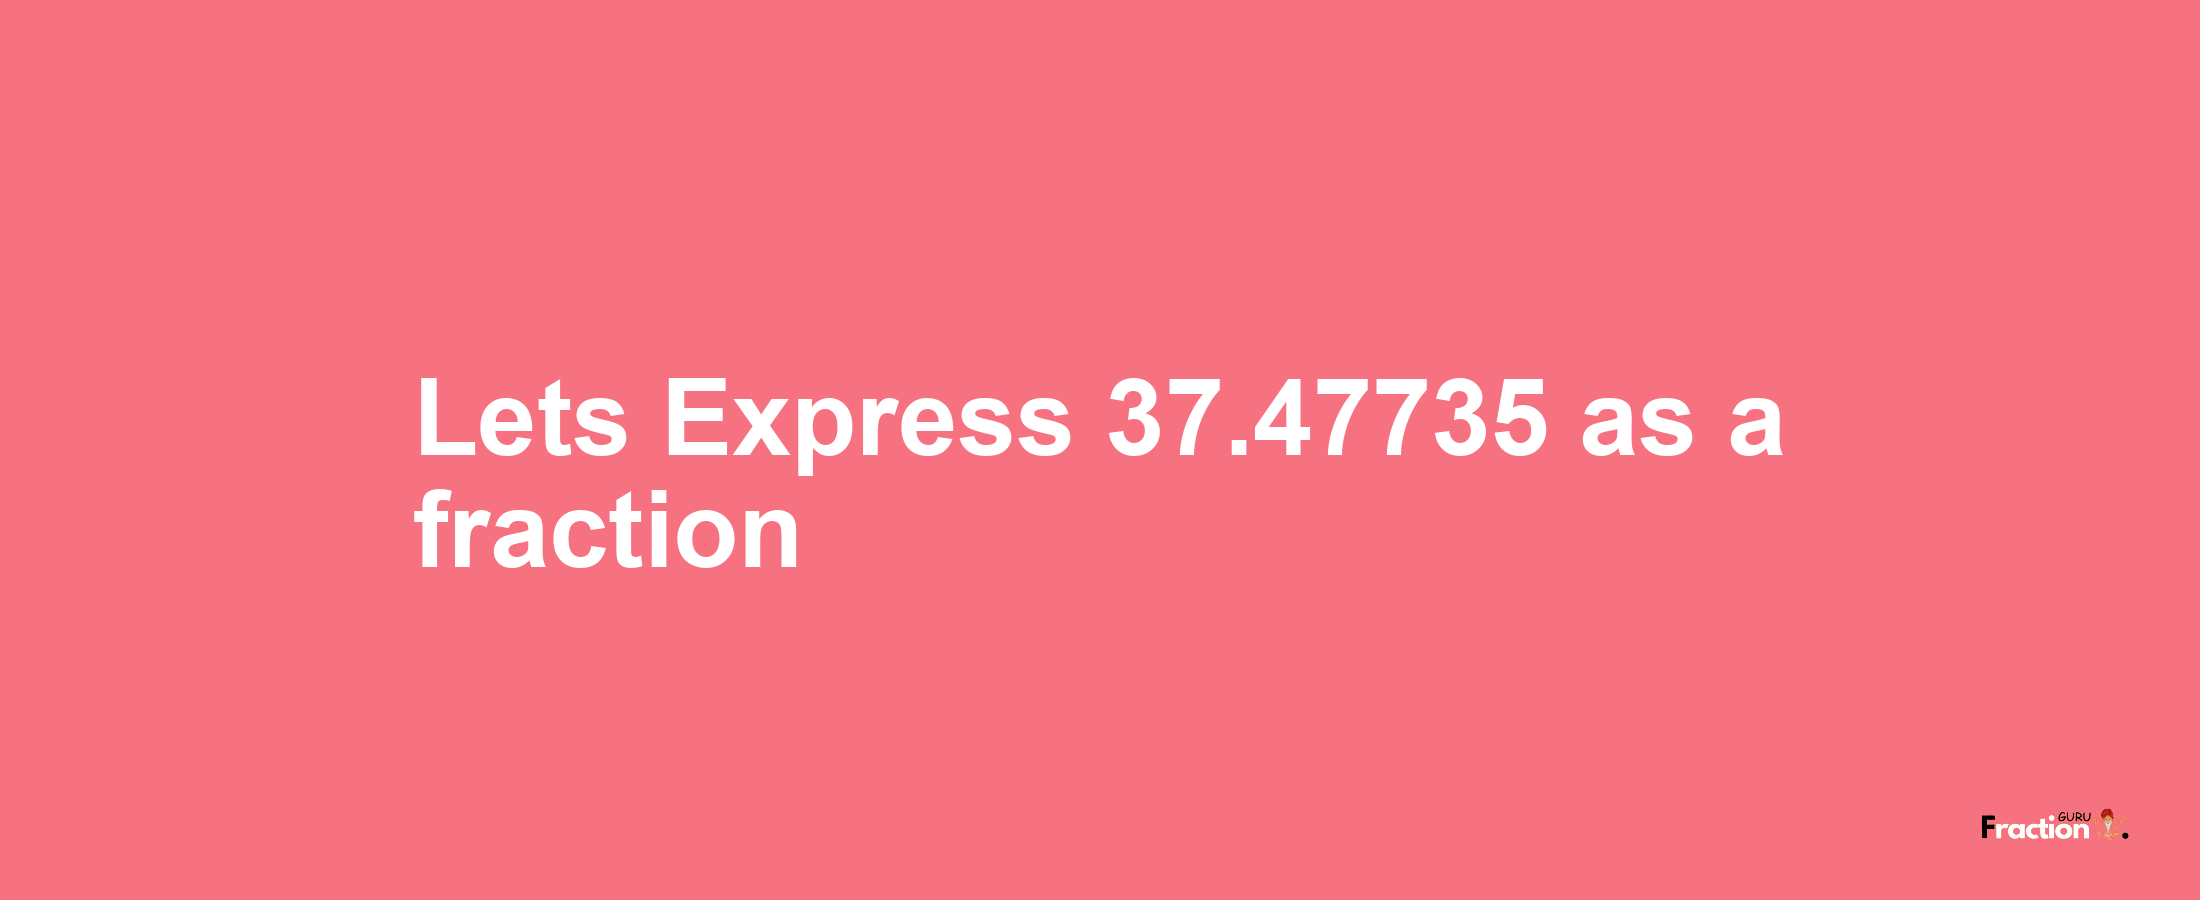 Lets Express 37.47735 as afraction